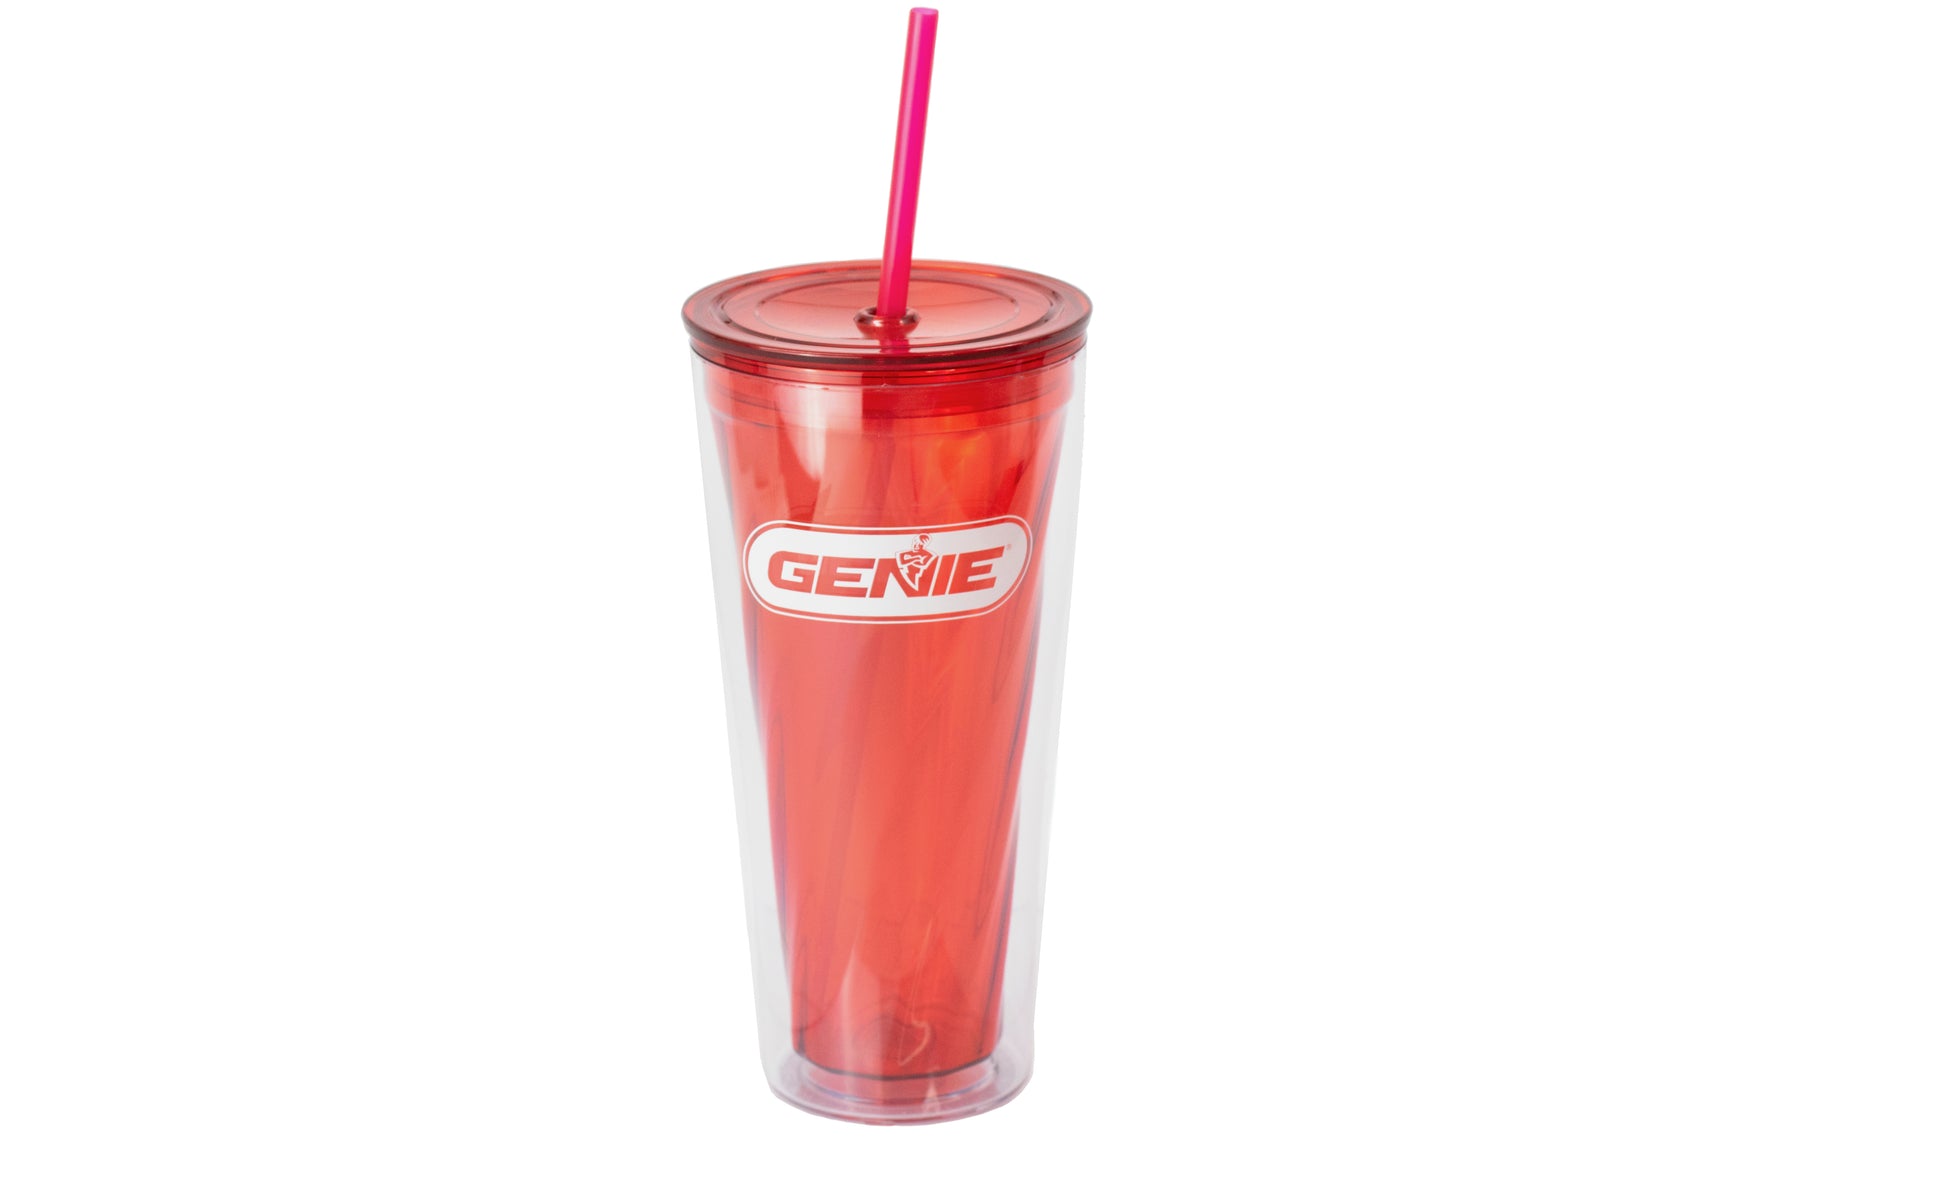 Genie 20 oz Reusable Cup With Matching Lid and Straw – The Genie